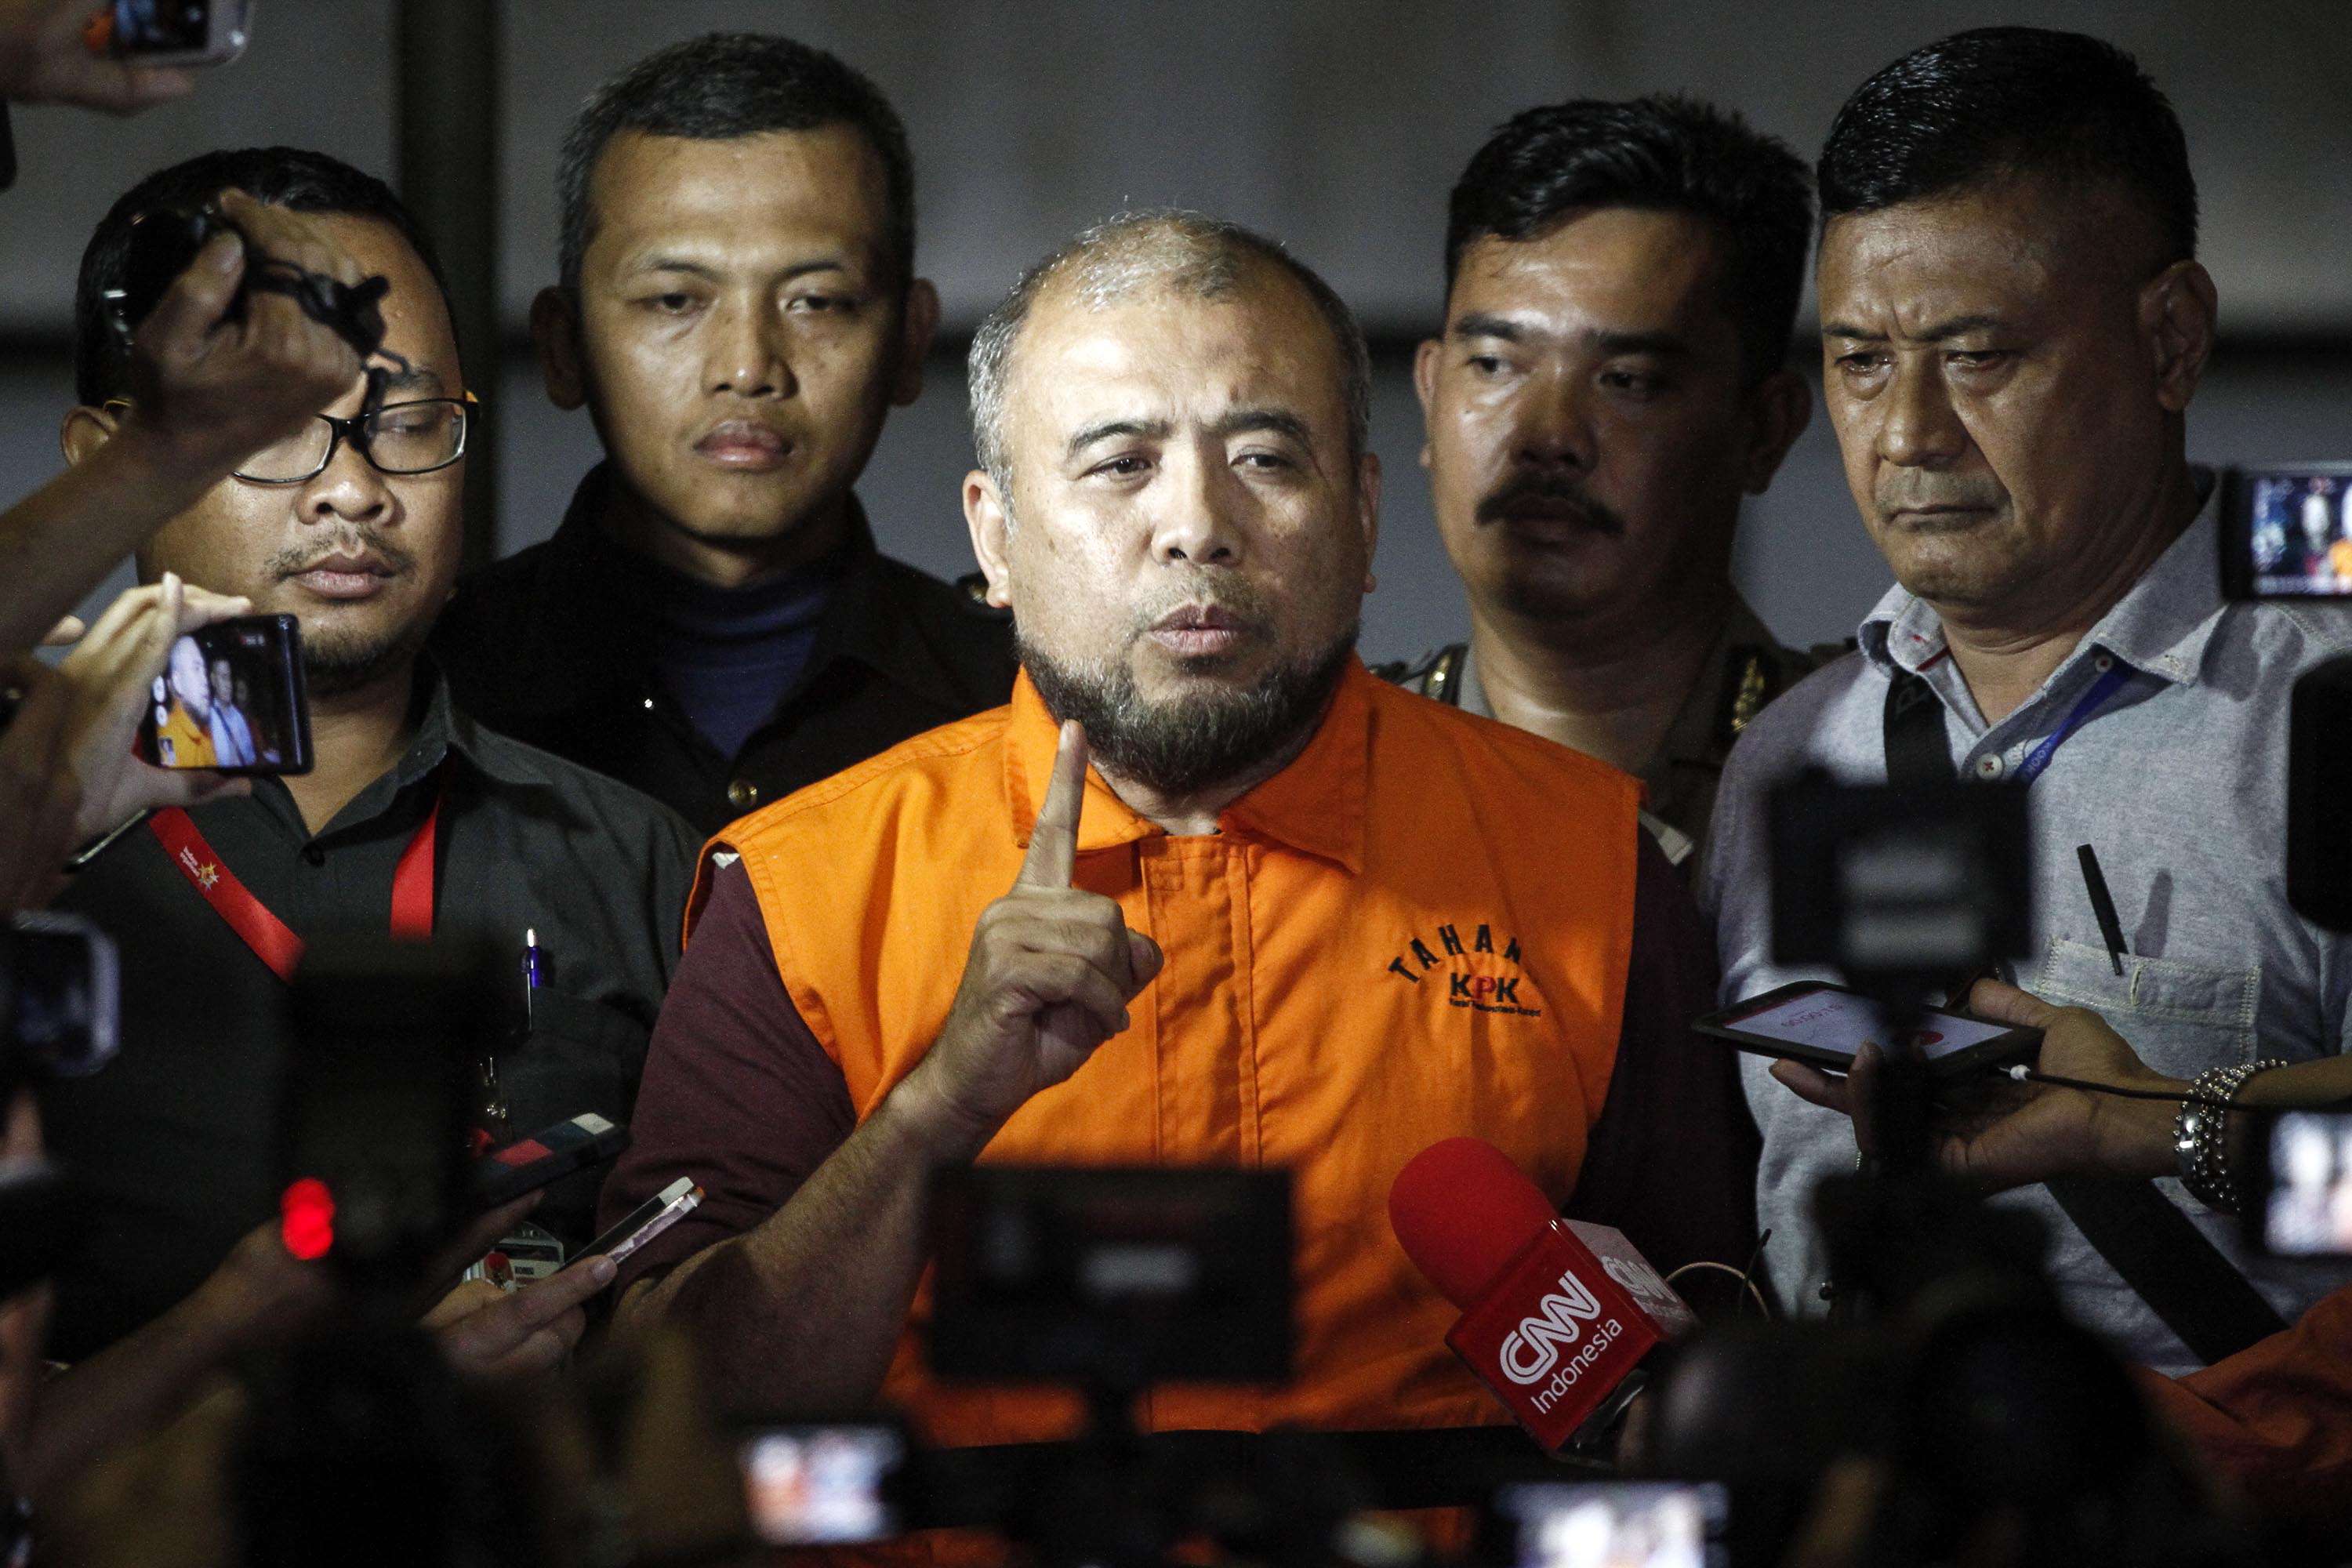 Patrialis Akbar, Indonesia’s former justice minister, speaks to the media after being detained for allegedly receiving bribes from a meat importer seeking to influence the Indonesian Constitutional Court. Photo: AFP